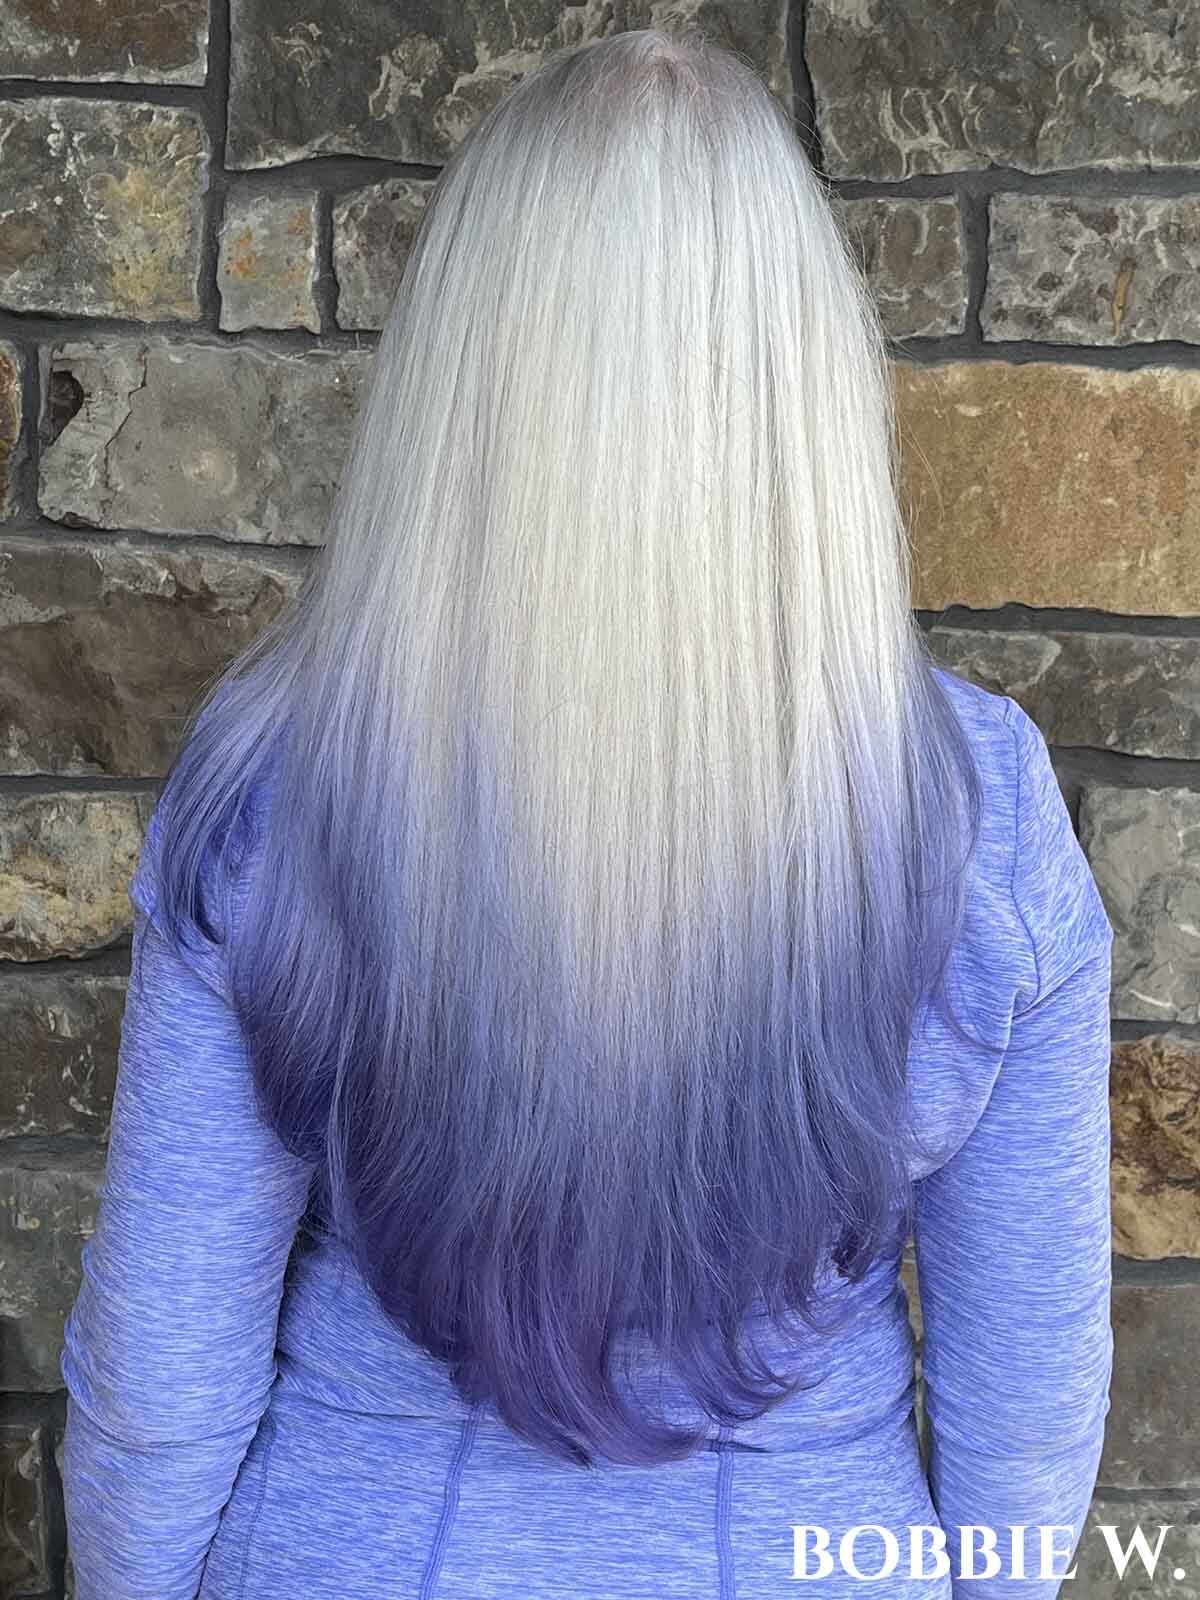 Woman facing away with long white hair and violet "ombre" dye on the ends.